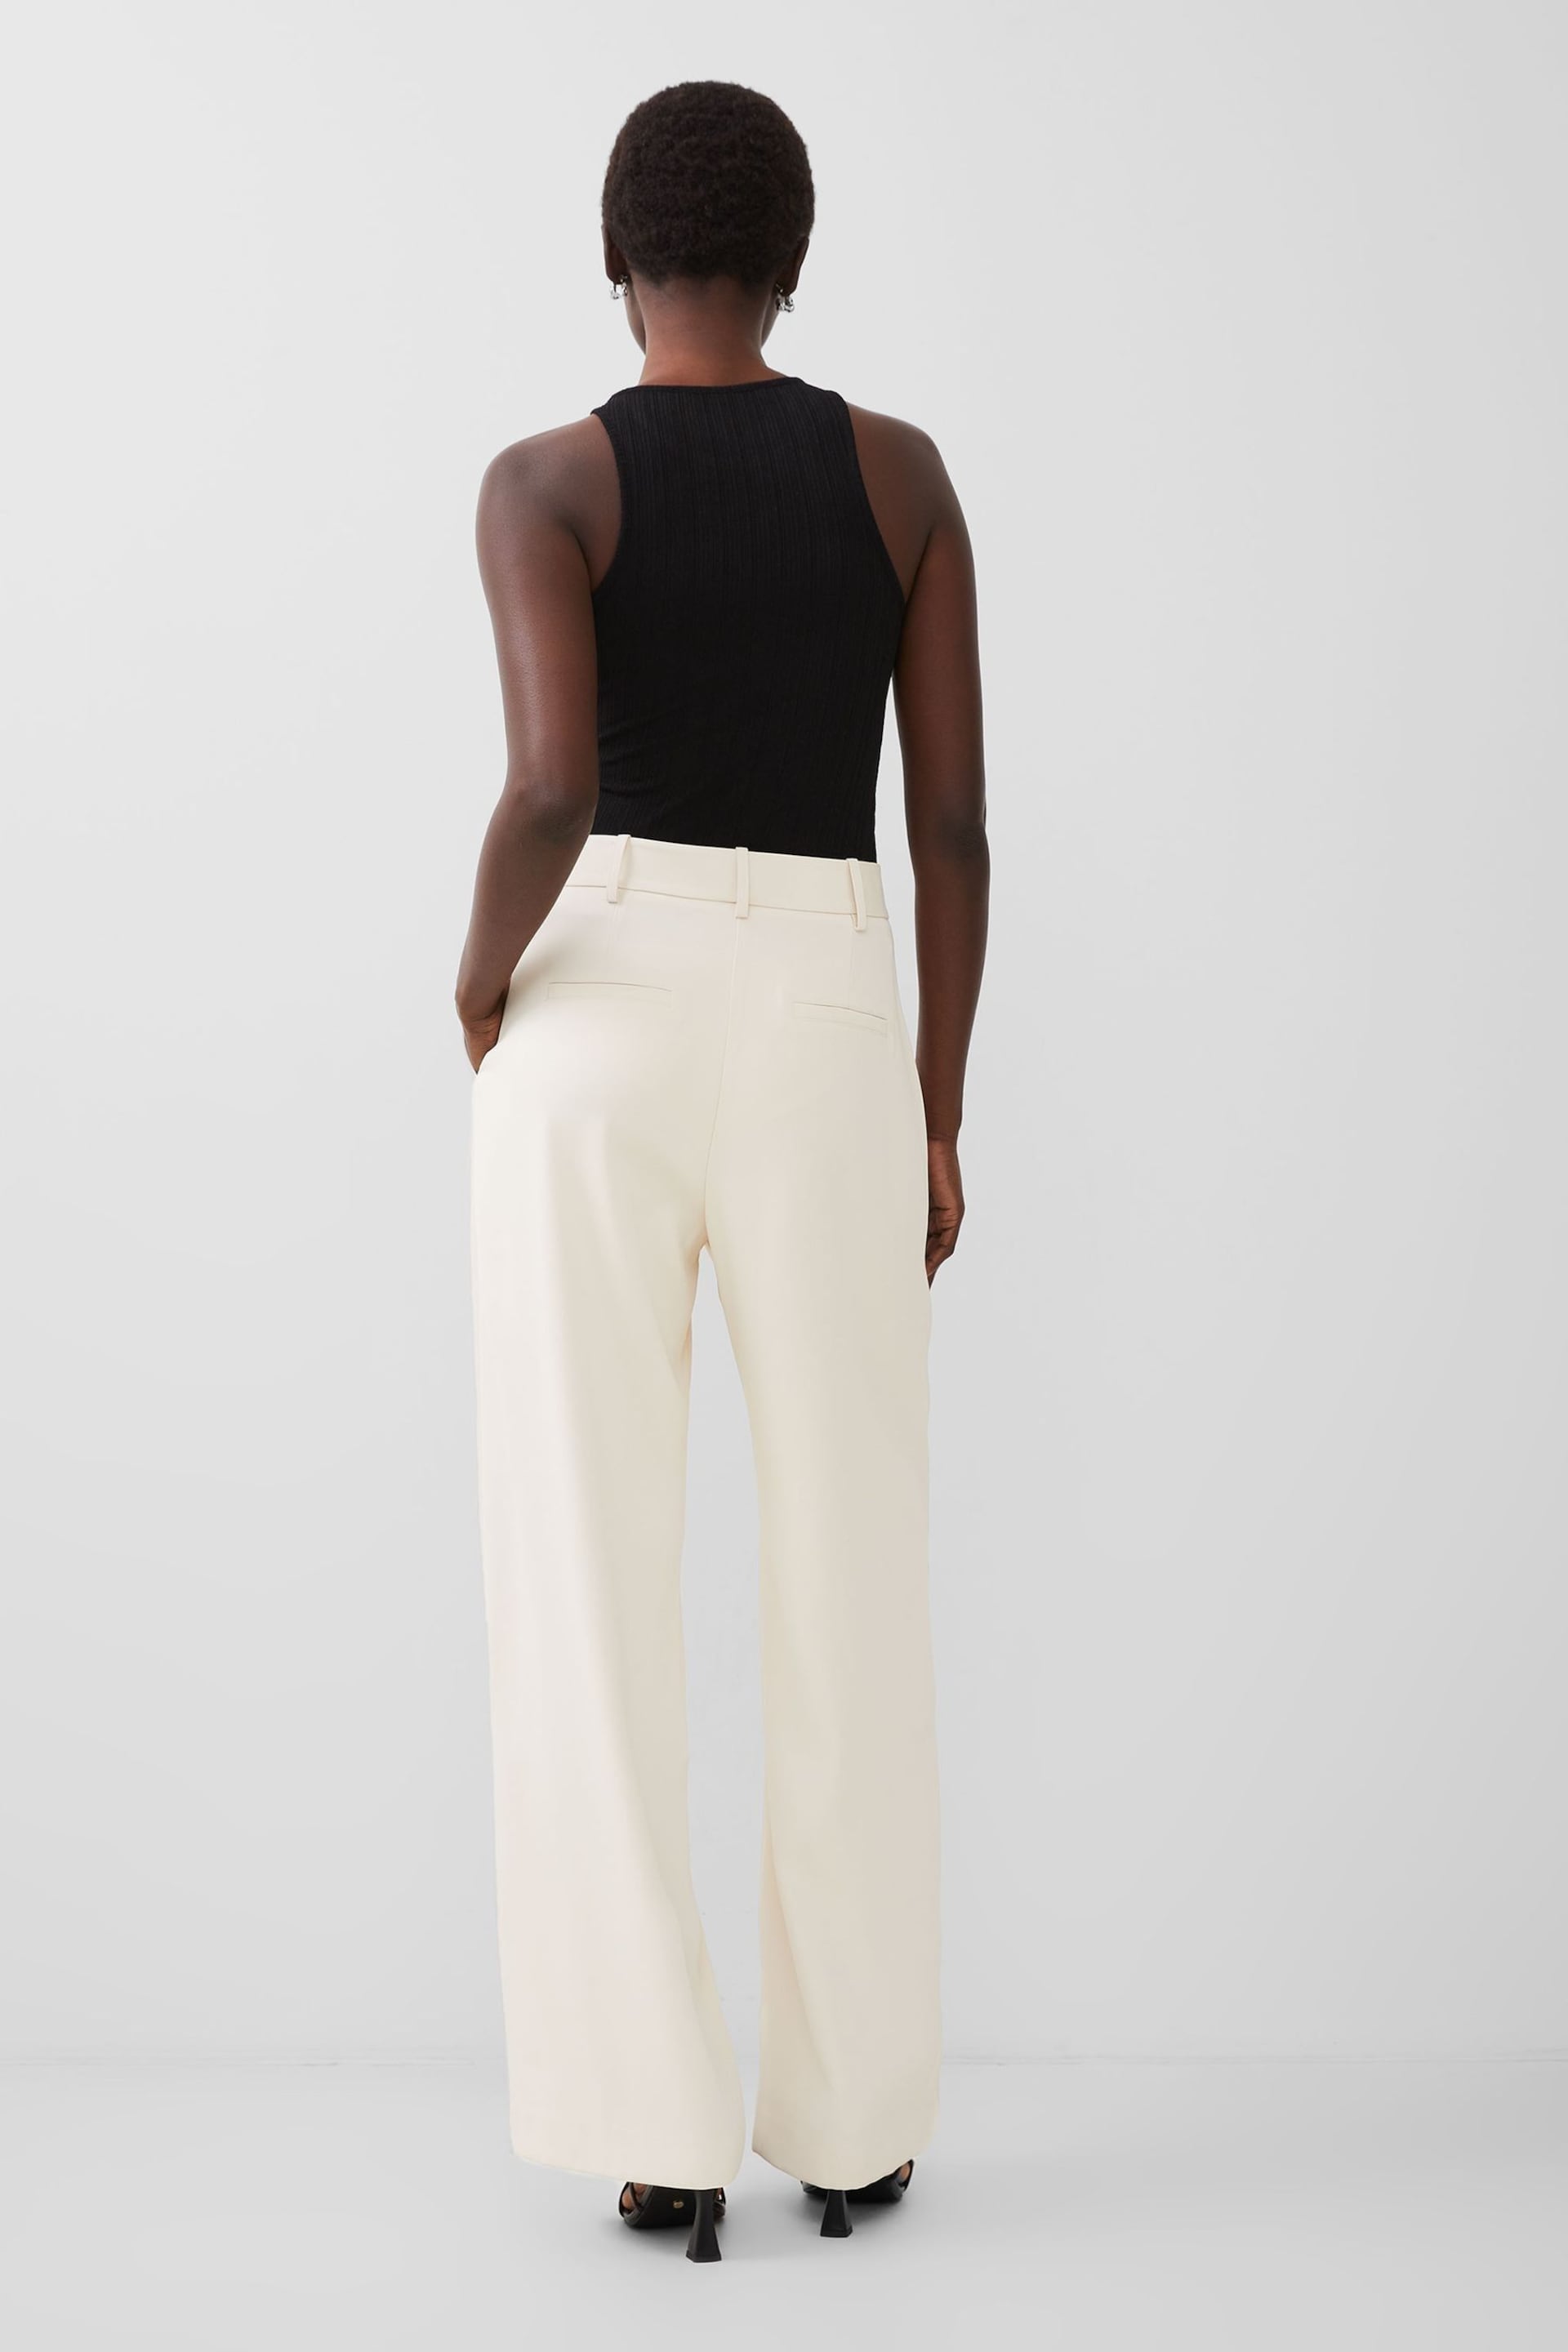 French Connection Harrie Suiting Trousers - Image 2 of 4